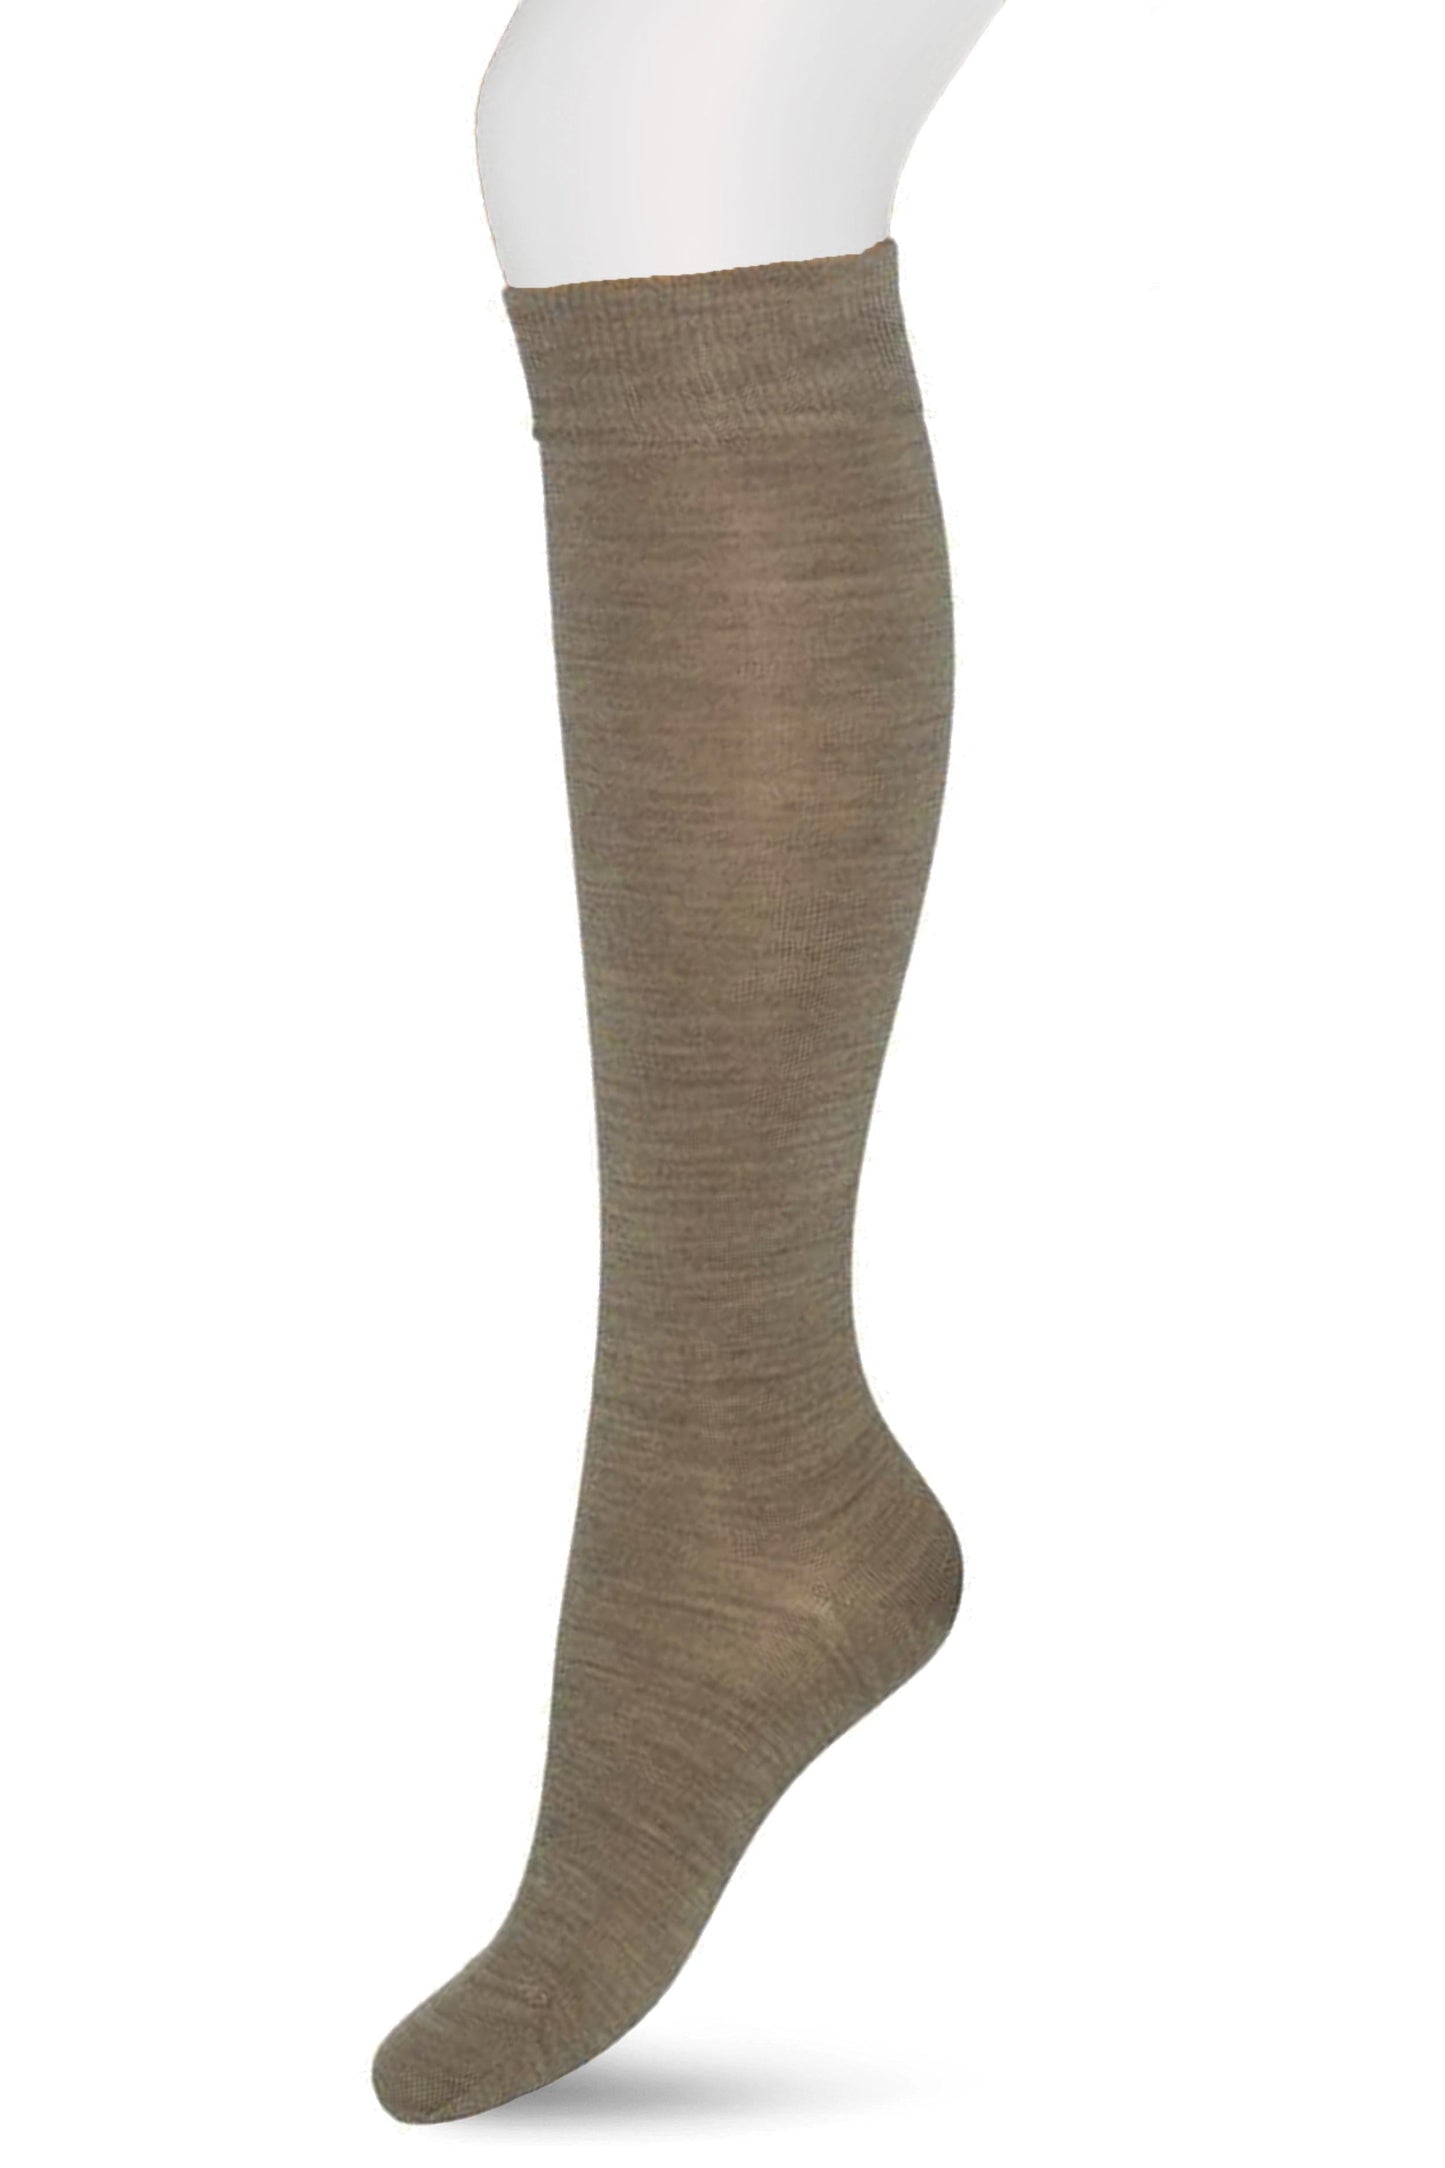 Bonnie Doon Wool/Cotton Knee-High R715011 - Taupe beige thermal knee socks perfect for cold Winters